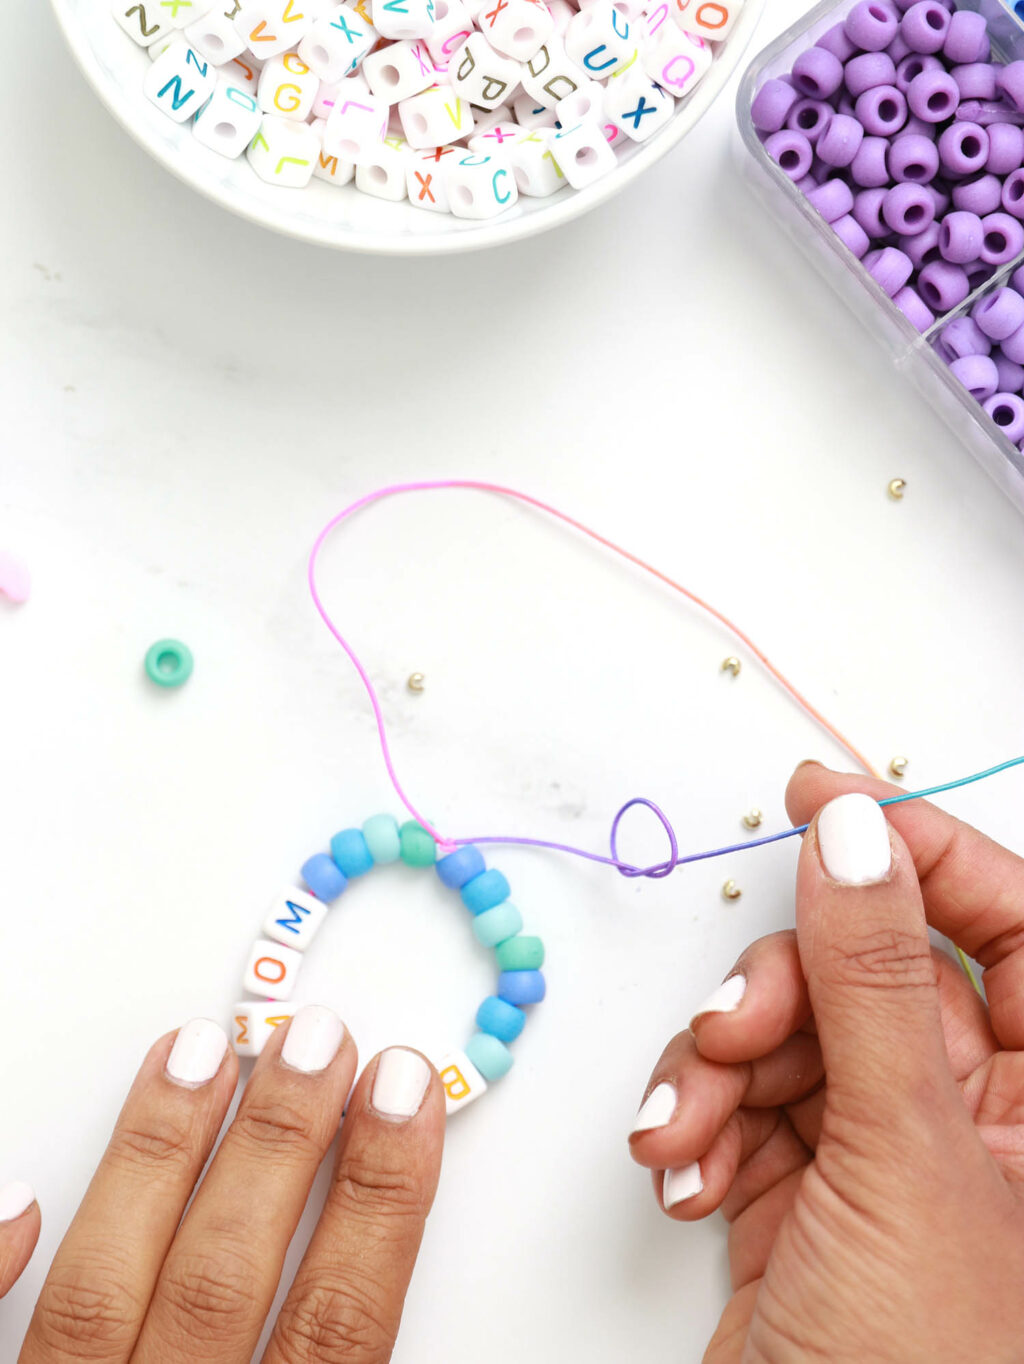 Wanna Trade? A DIY Guide to Making Friendship Bracelets | Autostraddle